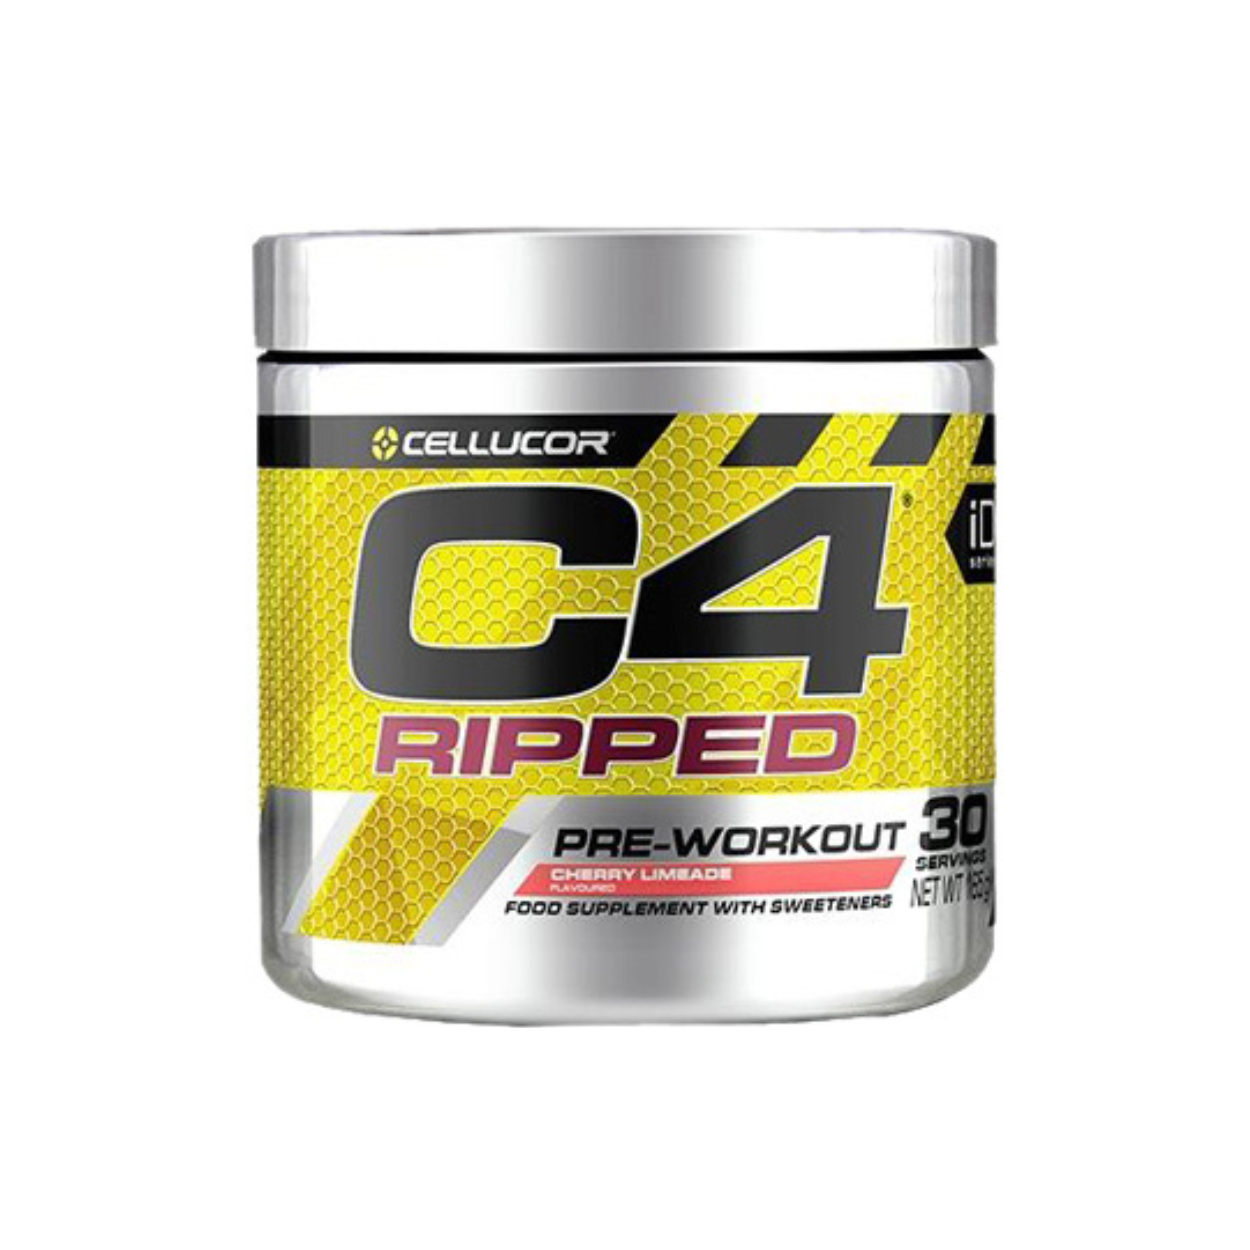 Cellucor C4 Ripped Cherry Limeade (165g Dose)